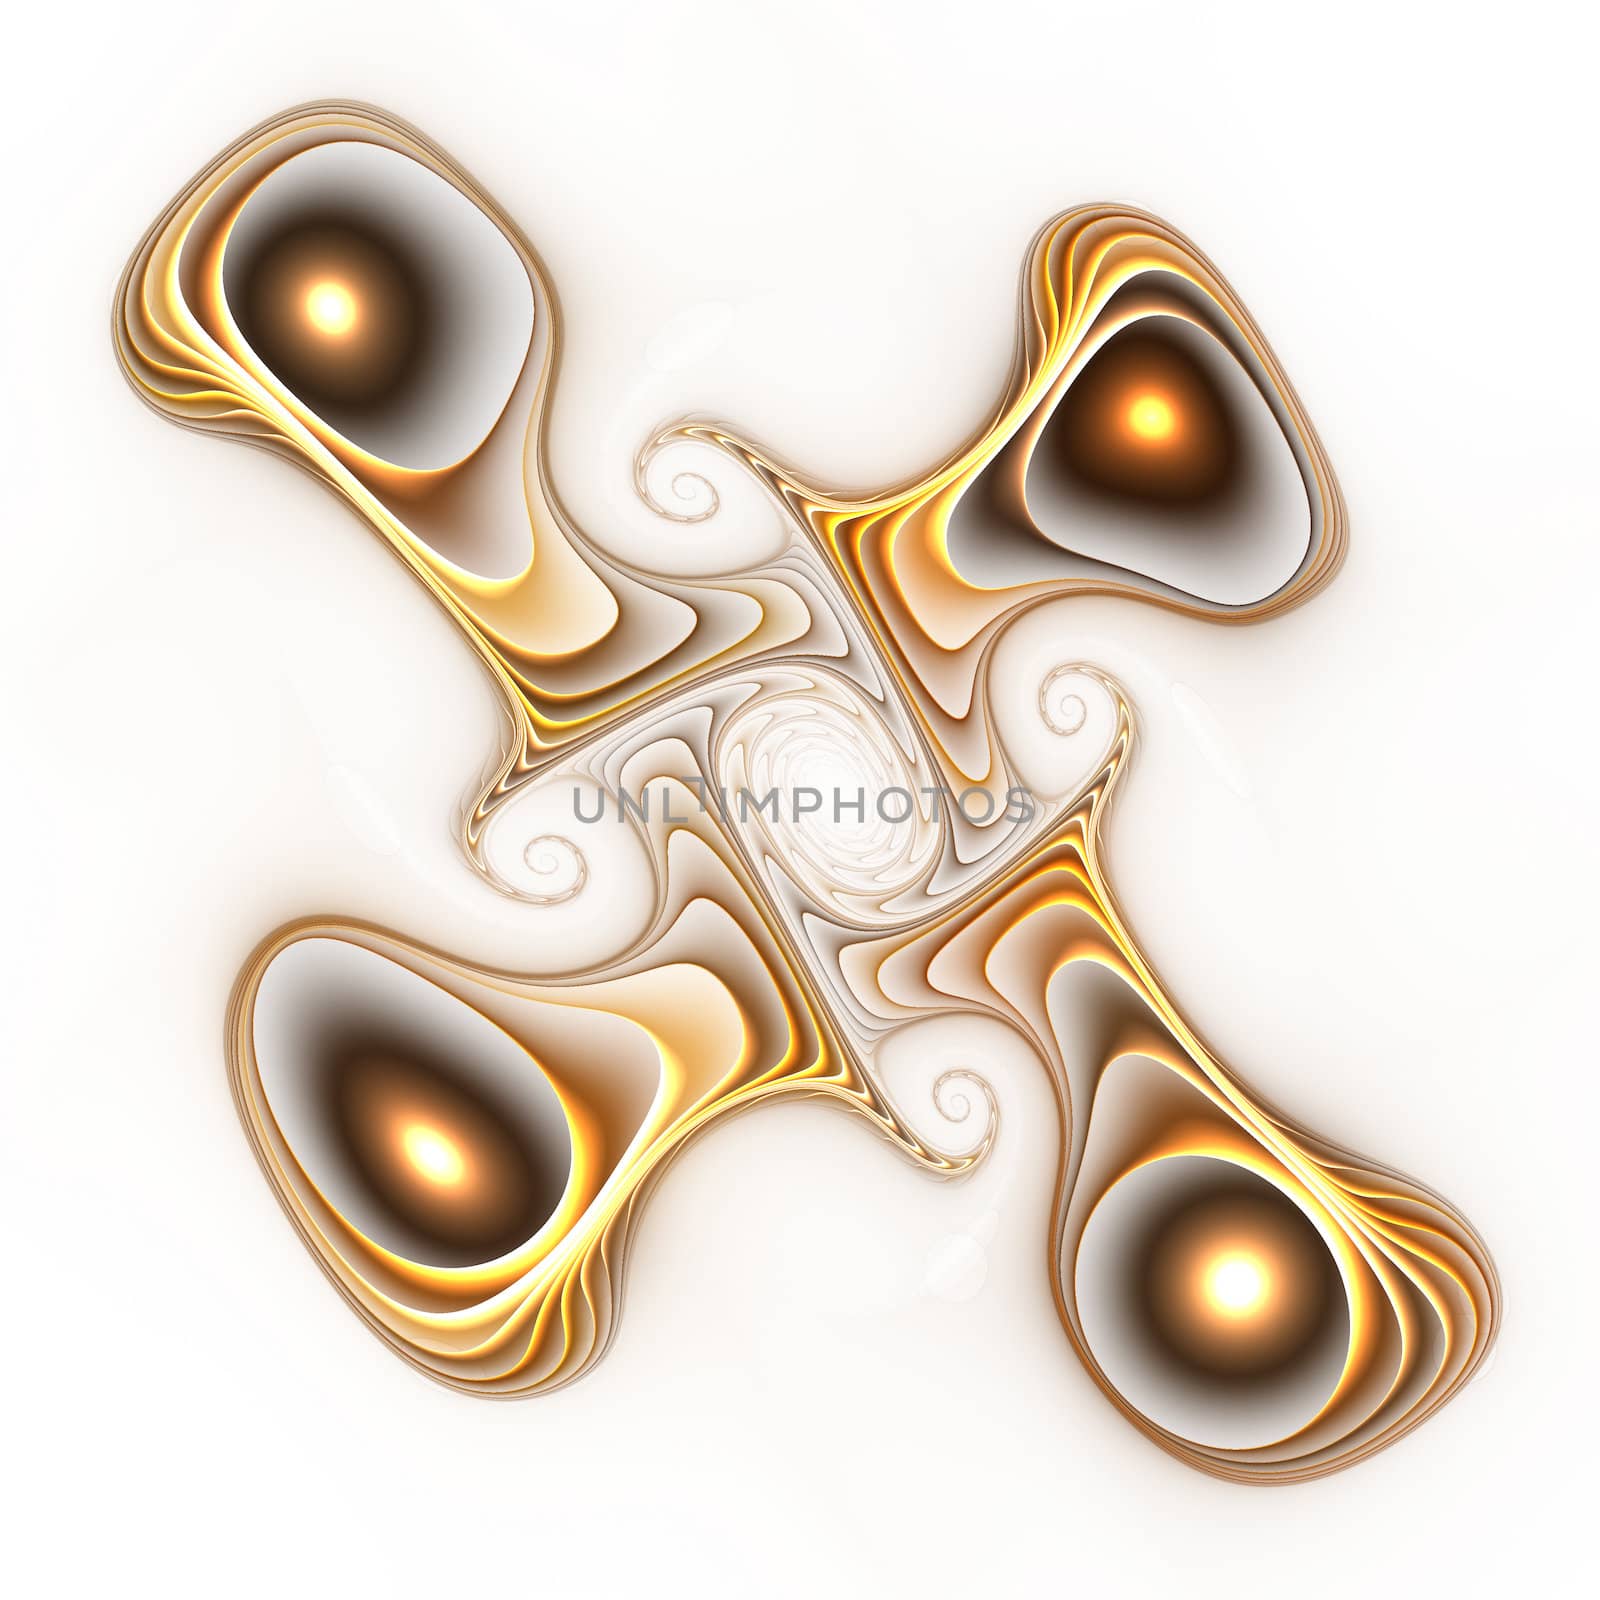 Abstract color image isolated on a white background. Design illustration. Curves and ornaments futuristic design. 